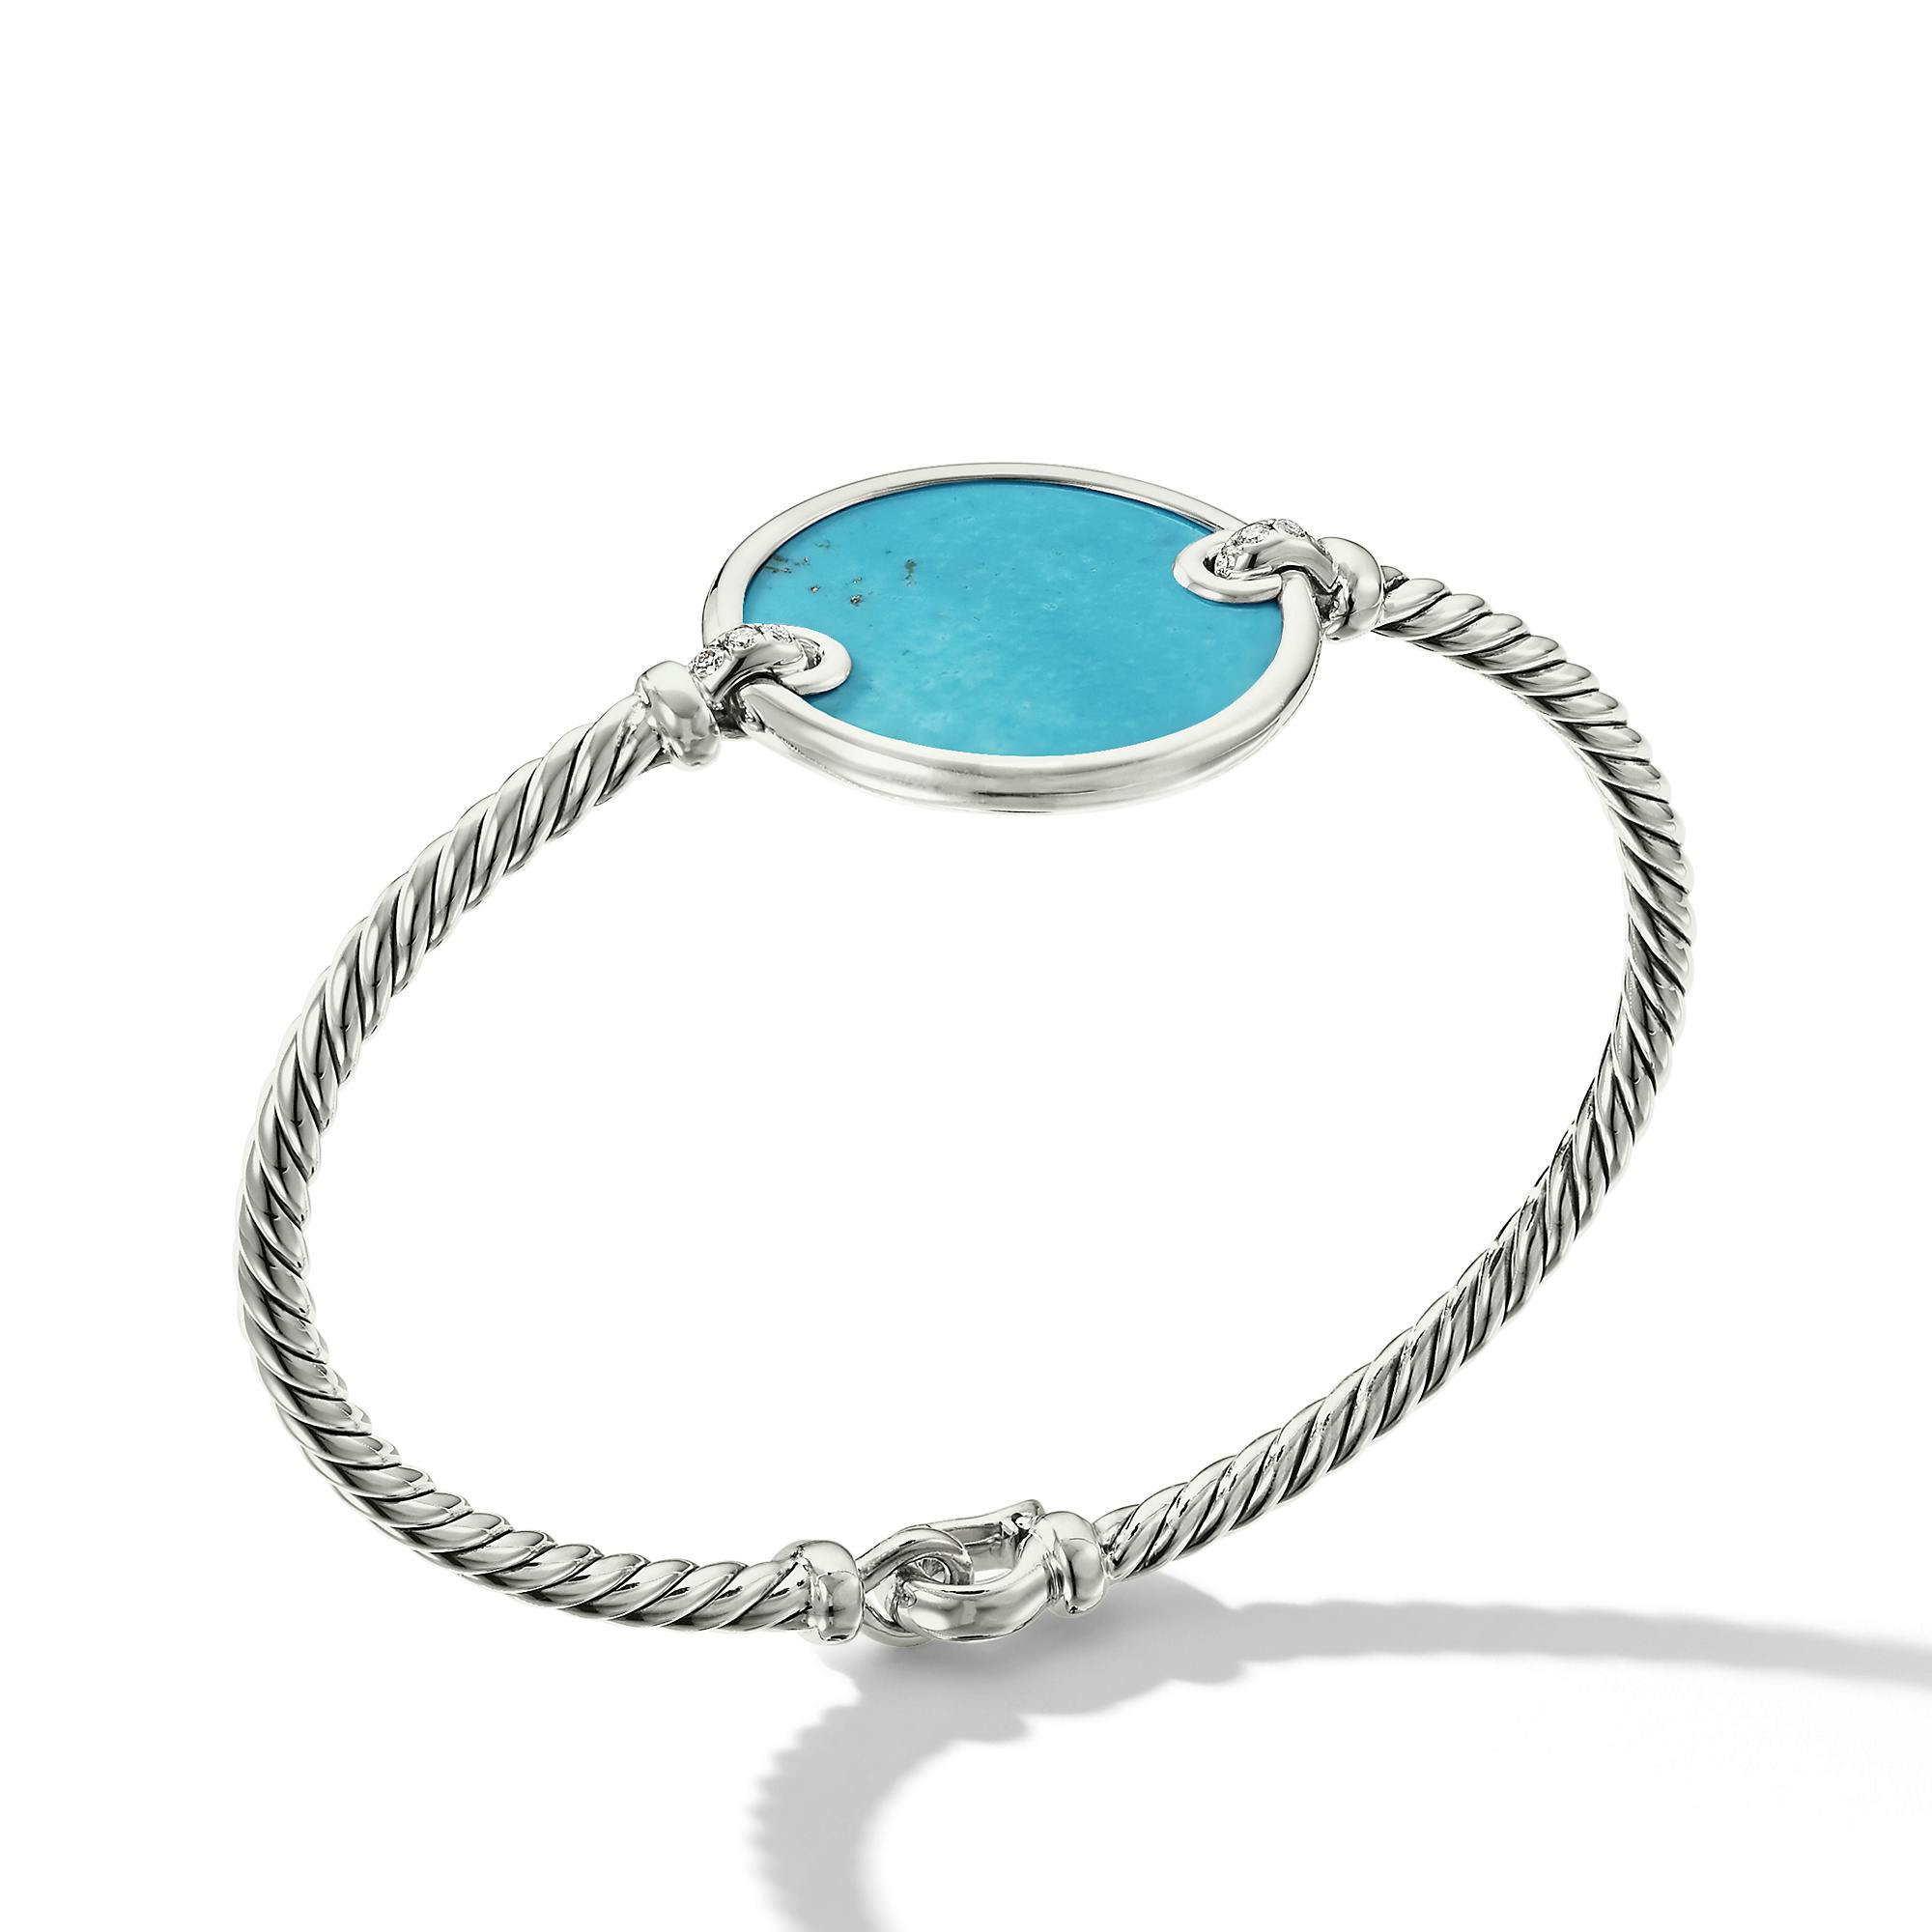 David Yurman DY Elements Bracelet with Turquoise and Pave Diamonds